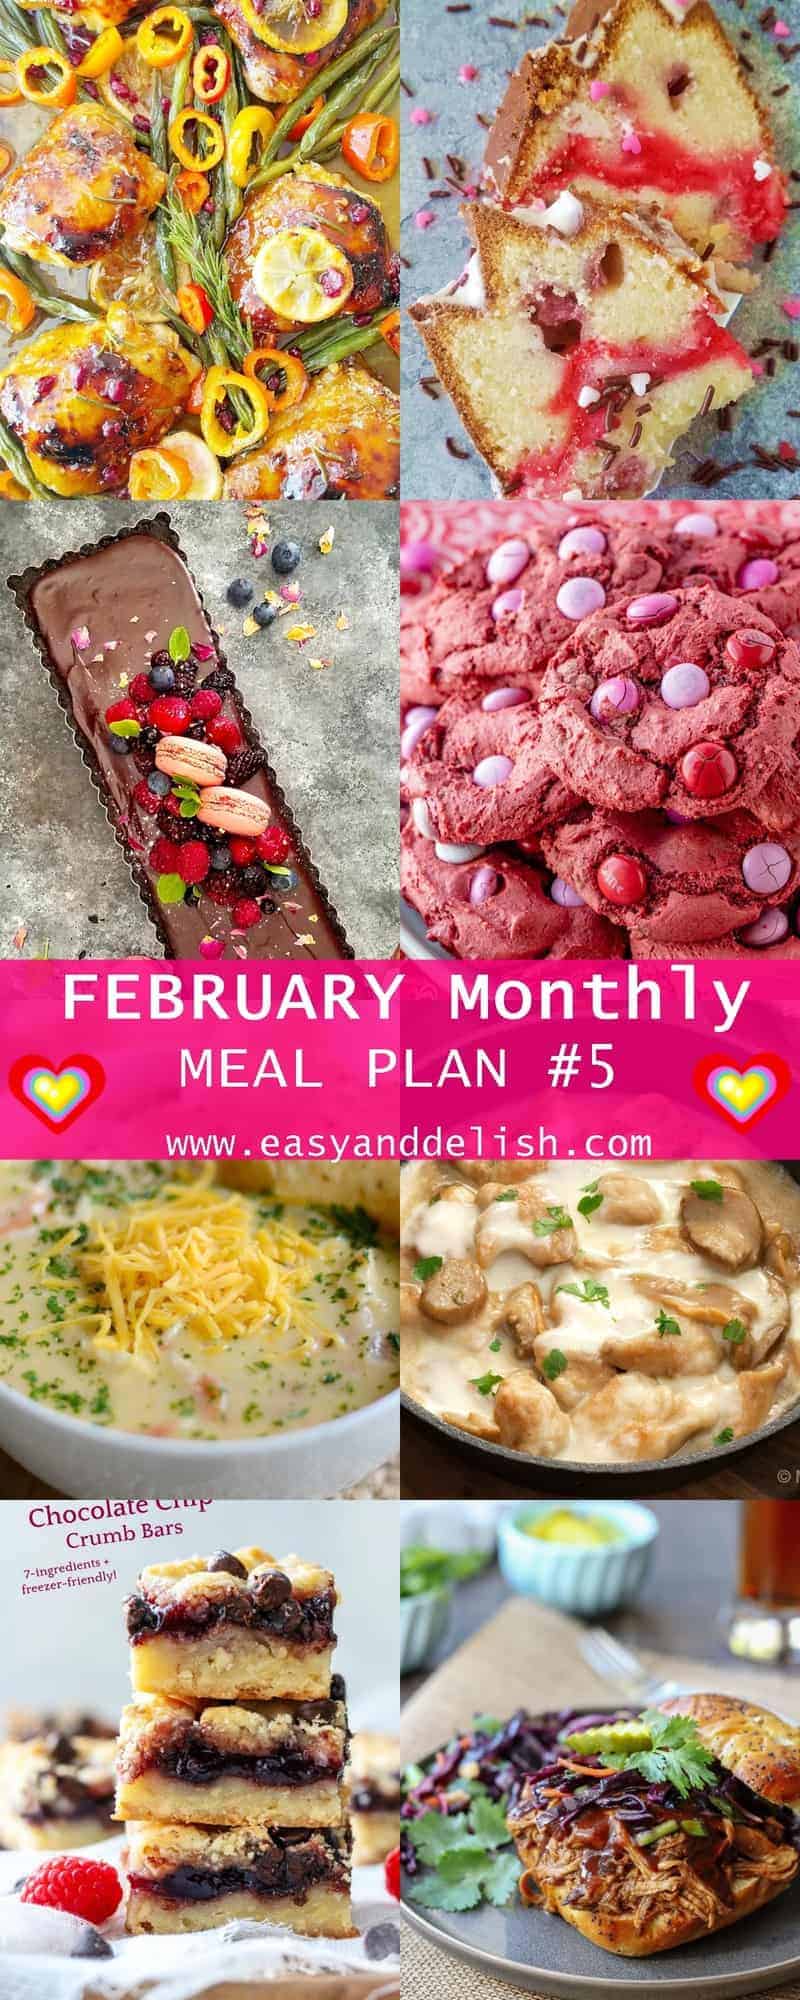 February Monthly Meal Plan 5 Easy and Delish